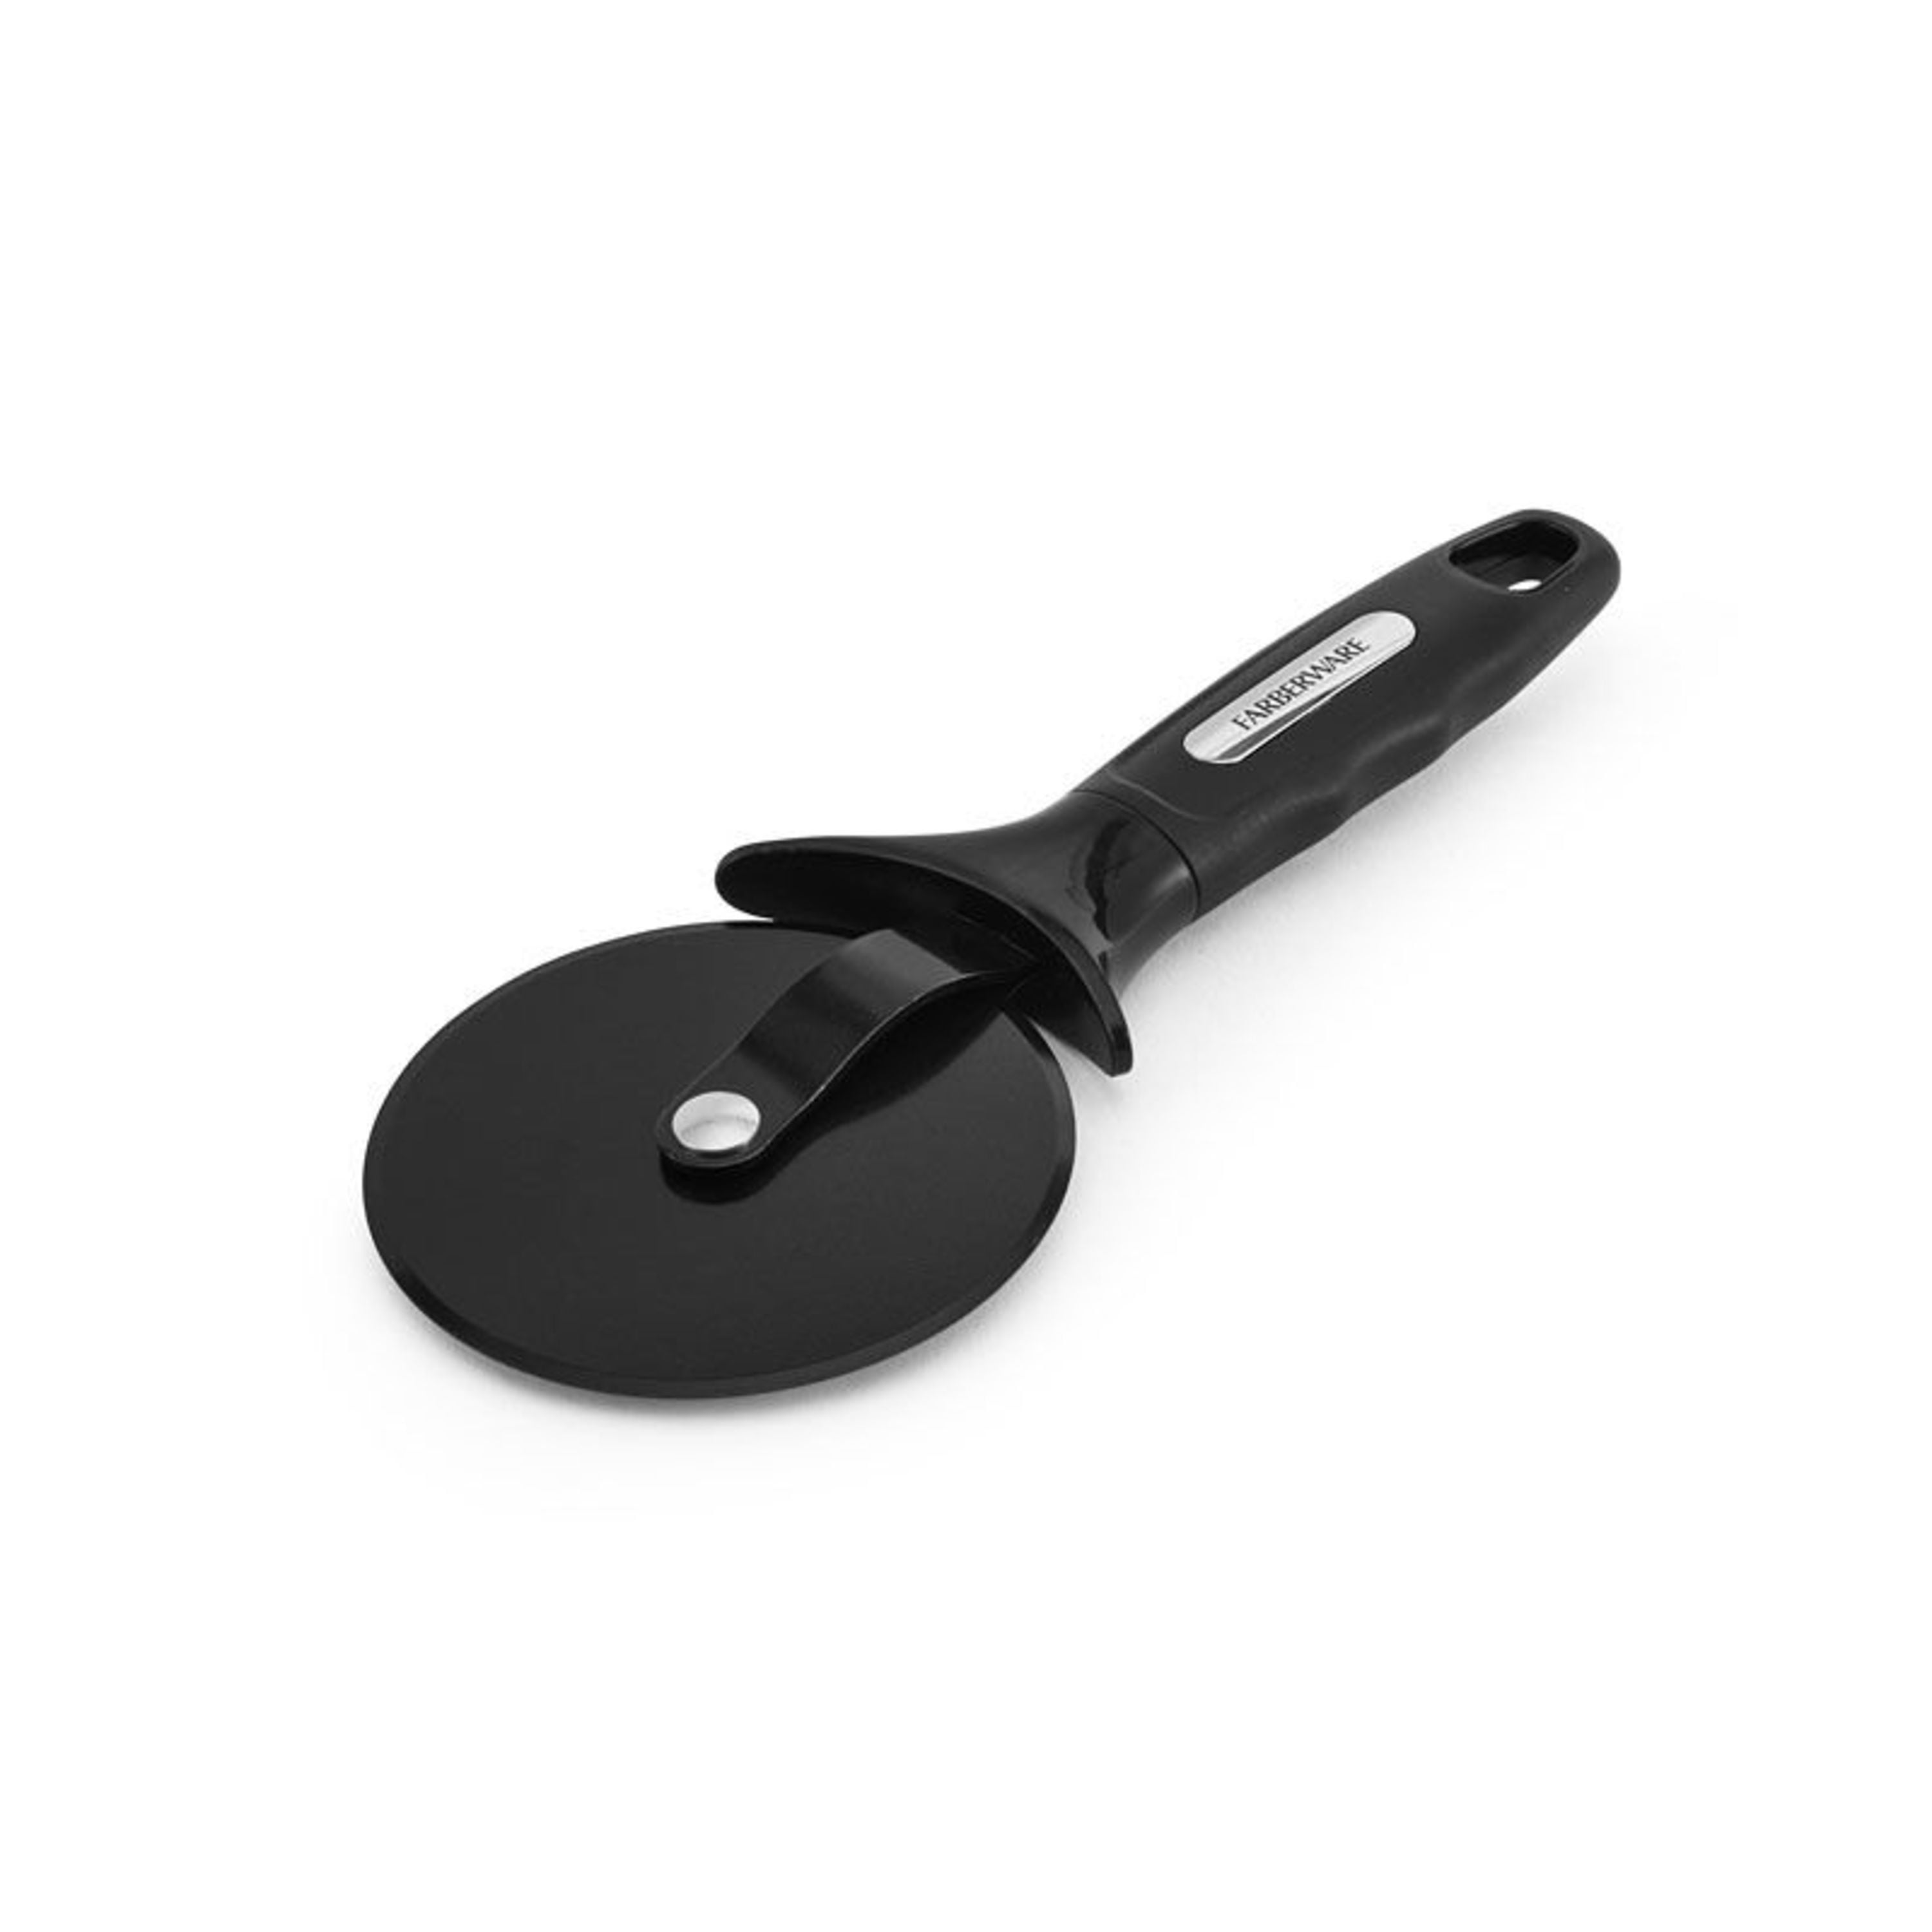 Cutco Model 1502 Pizza Cutter.Sharp, Removable, Easy to Clean blade..Soft-grip Thermoresin Black handle.7 3/4 Overall Length. Still in